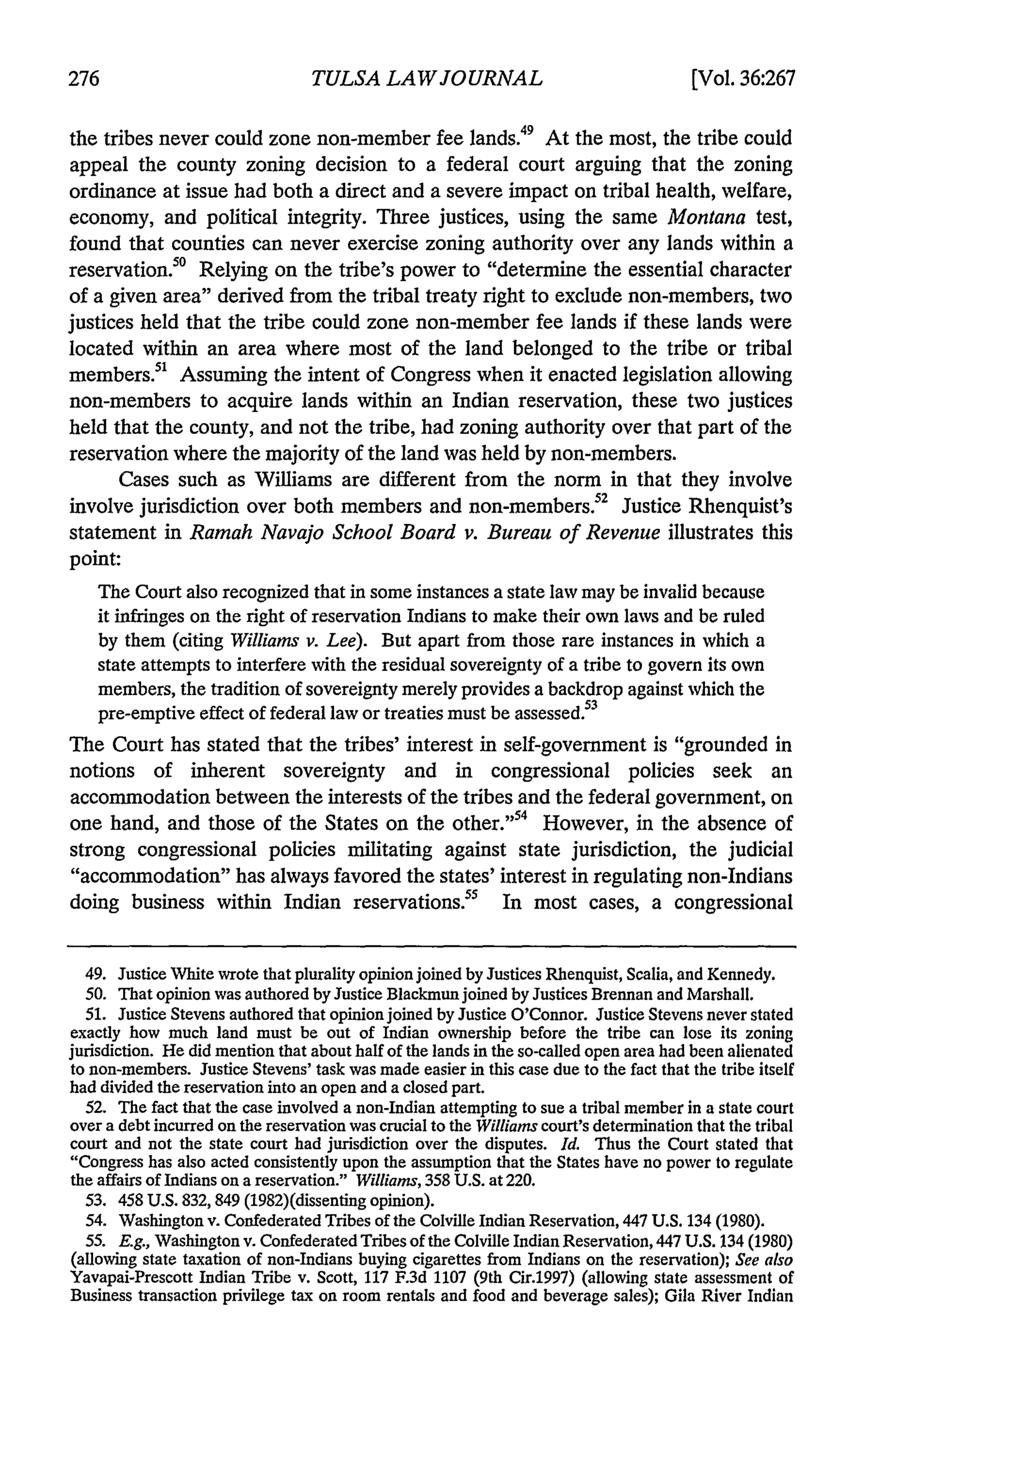 Tulsa Law Review, Vol. 36 [2000], Iss. 2, Art. 2 TULSA LAW JOURNAL [Vol. 36:267 the tribes never could zone non-member fee lands.